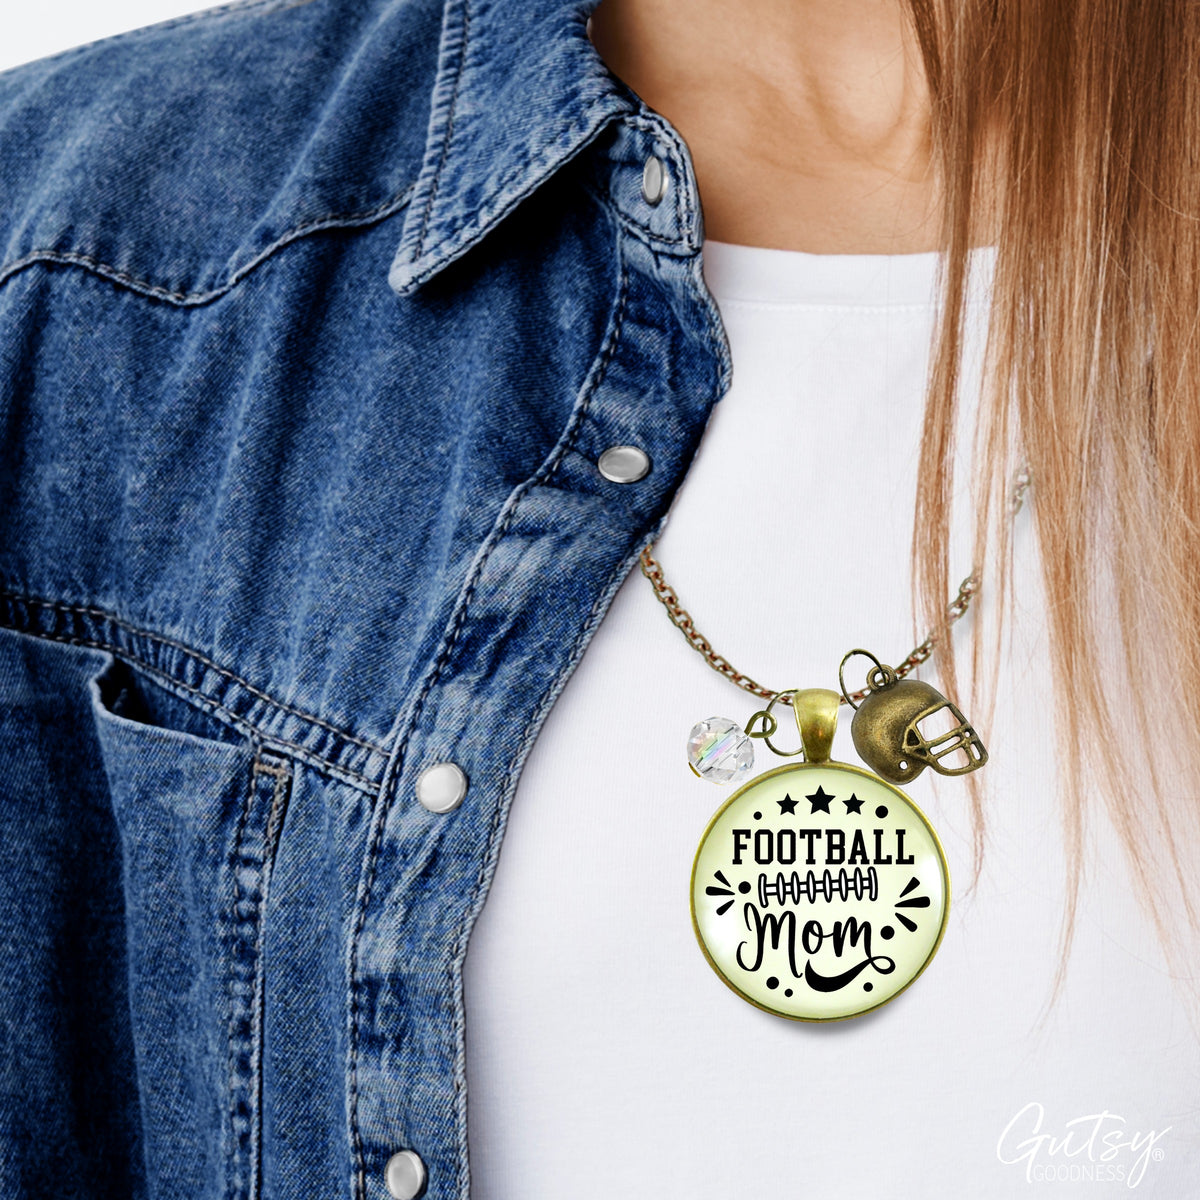 Football Mom Necklace Favorite Player Proud of Son Gift Jewelry Sports Team Handmade Autumn Season Pendant Quote  Necklace - Gutsy Goodness Handmade Jewelry